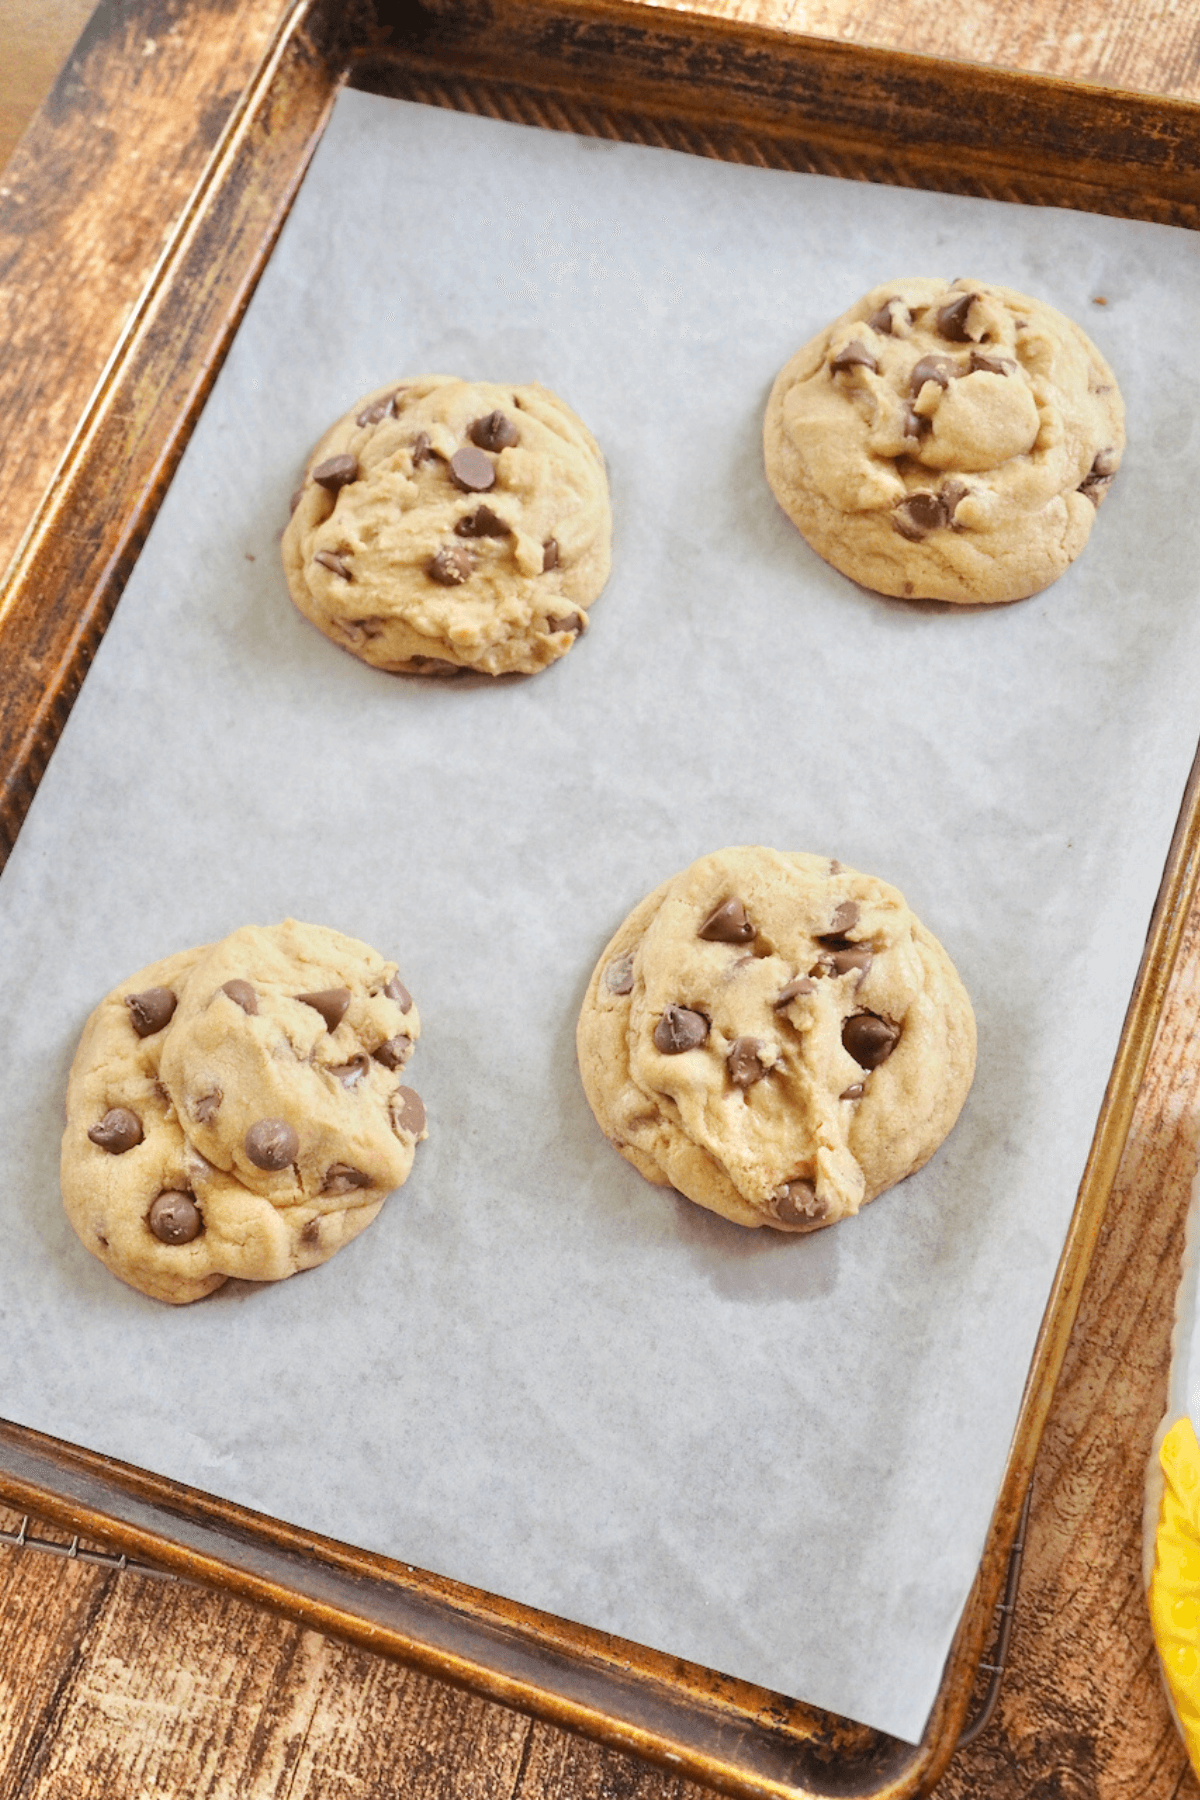 Baked giant Copycat Crumbl Chocolate Chip Cookies on baking sheet cooling.